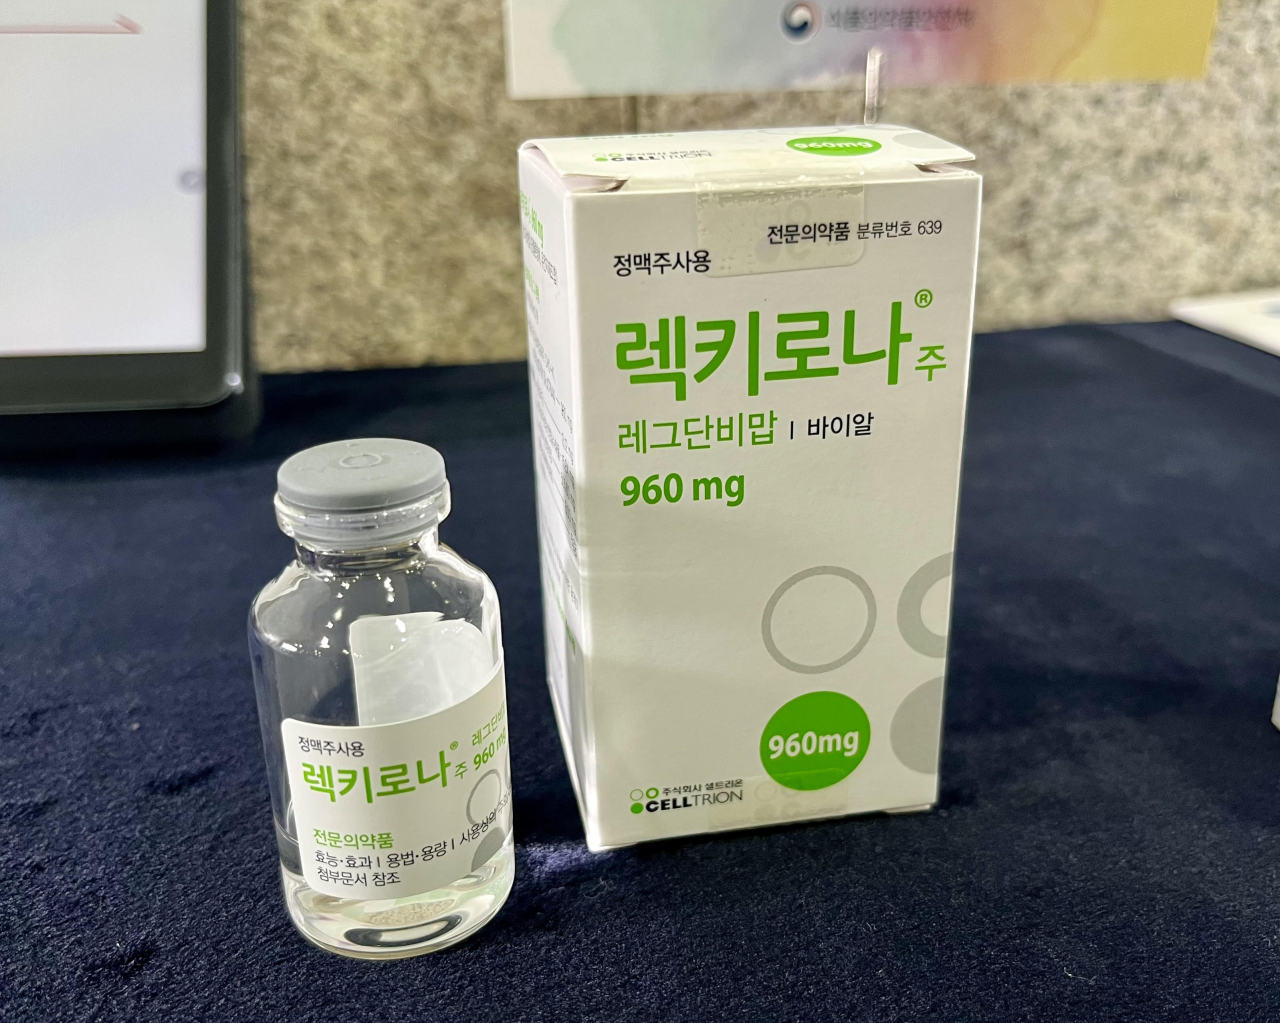 A vial of regkirona, an intravenously administered antibody drug against COVID-19, is placed on the table. (Kim Arin/The Korea Herald)